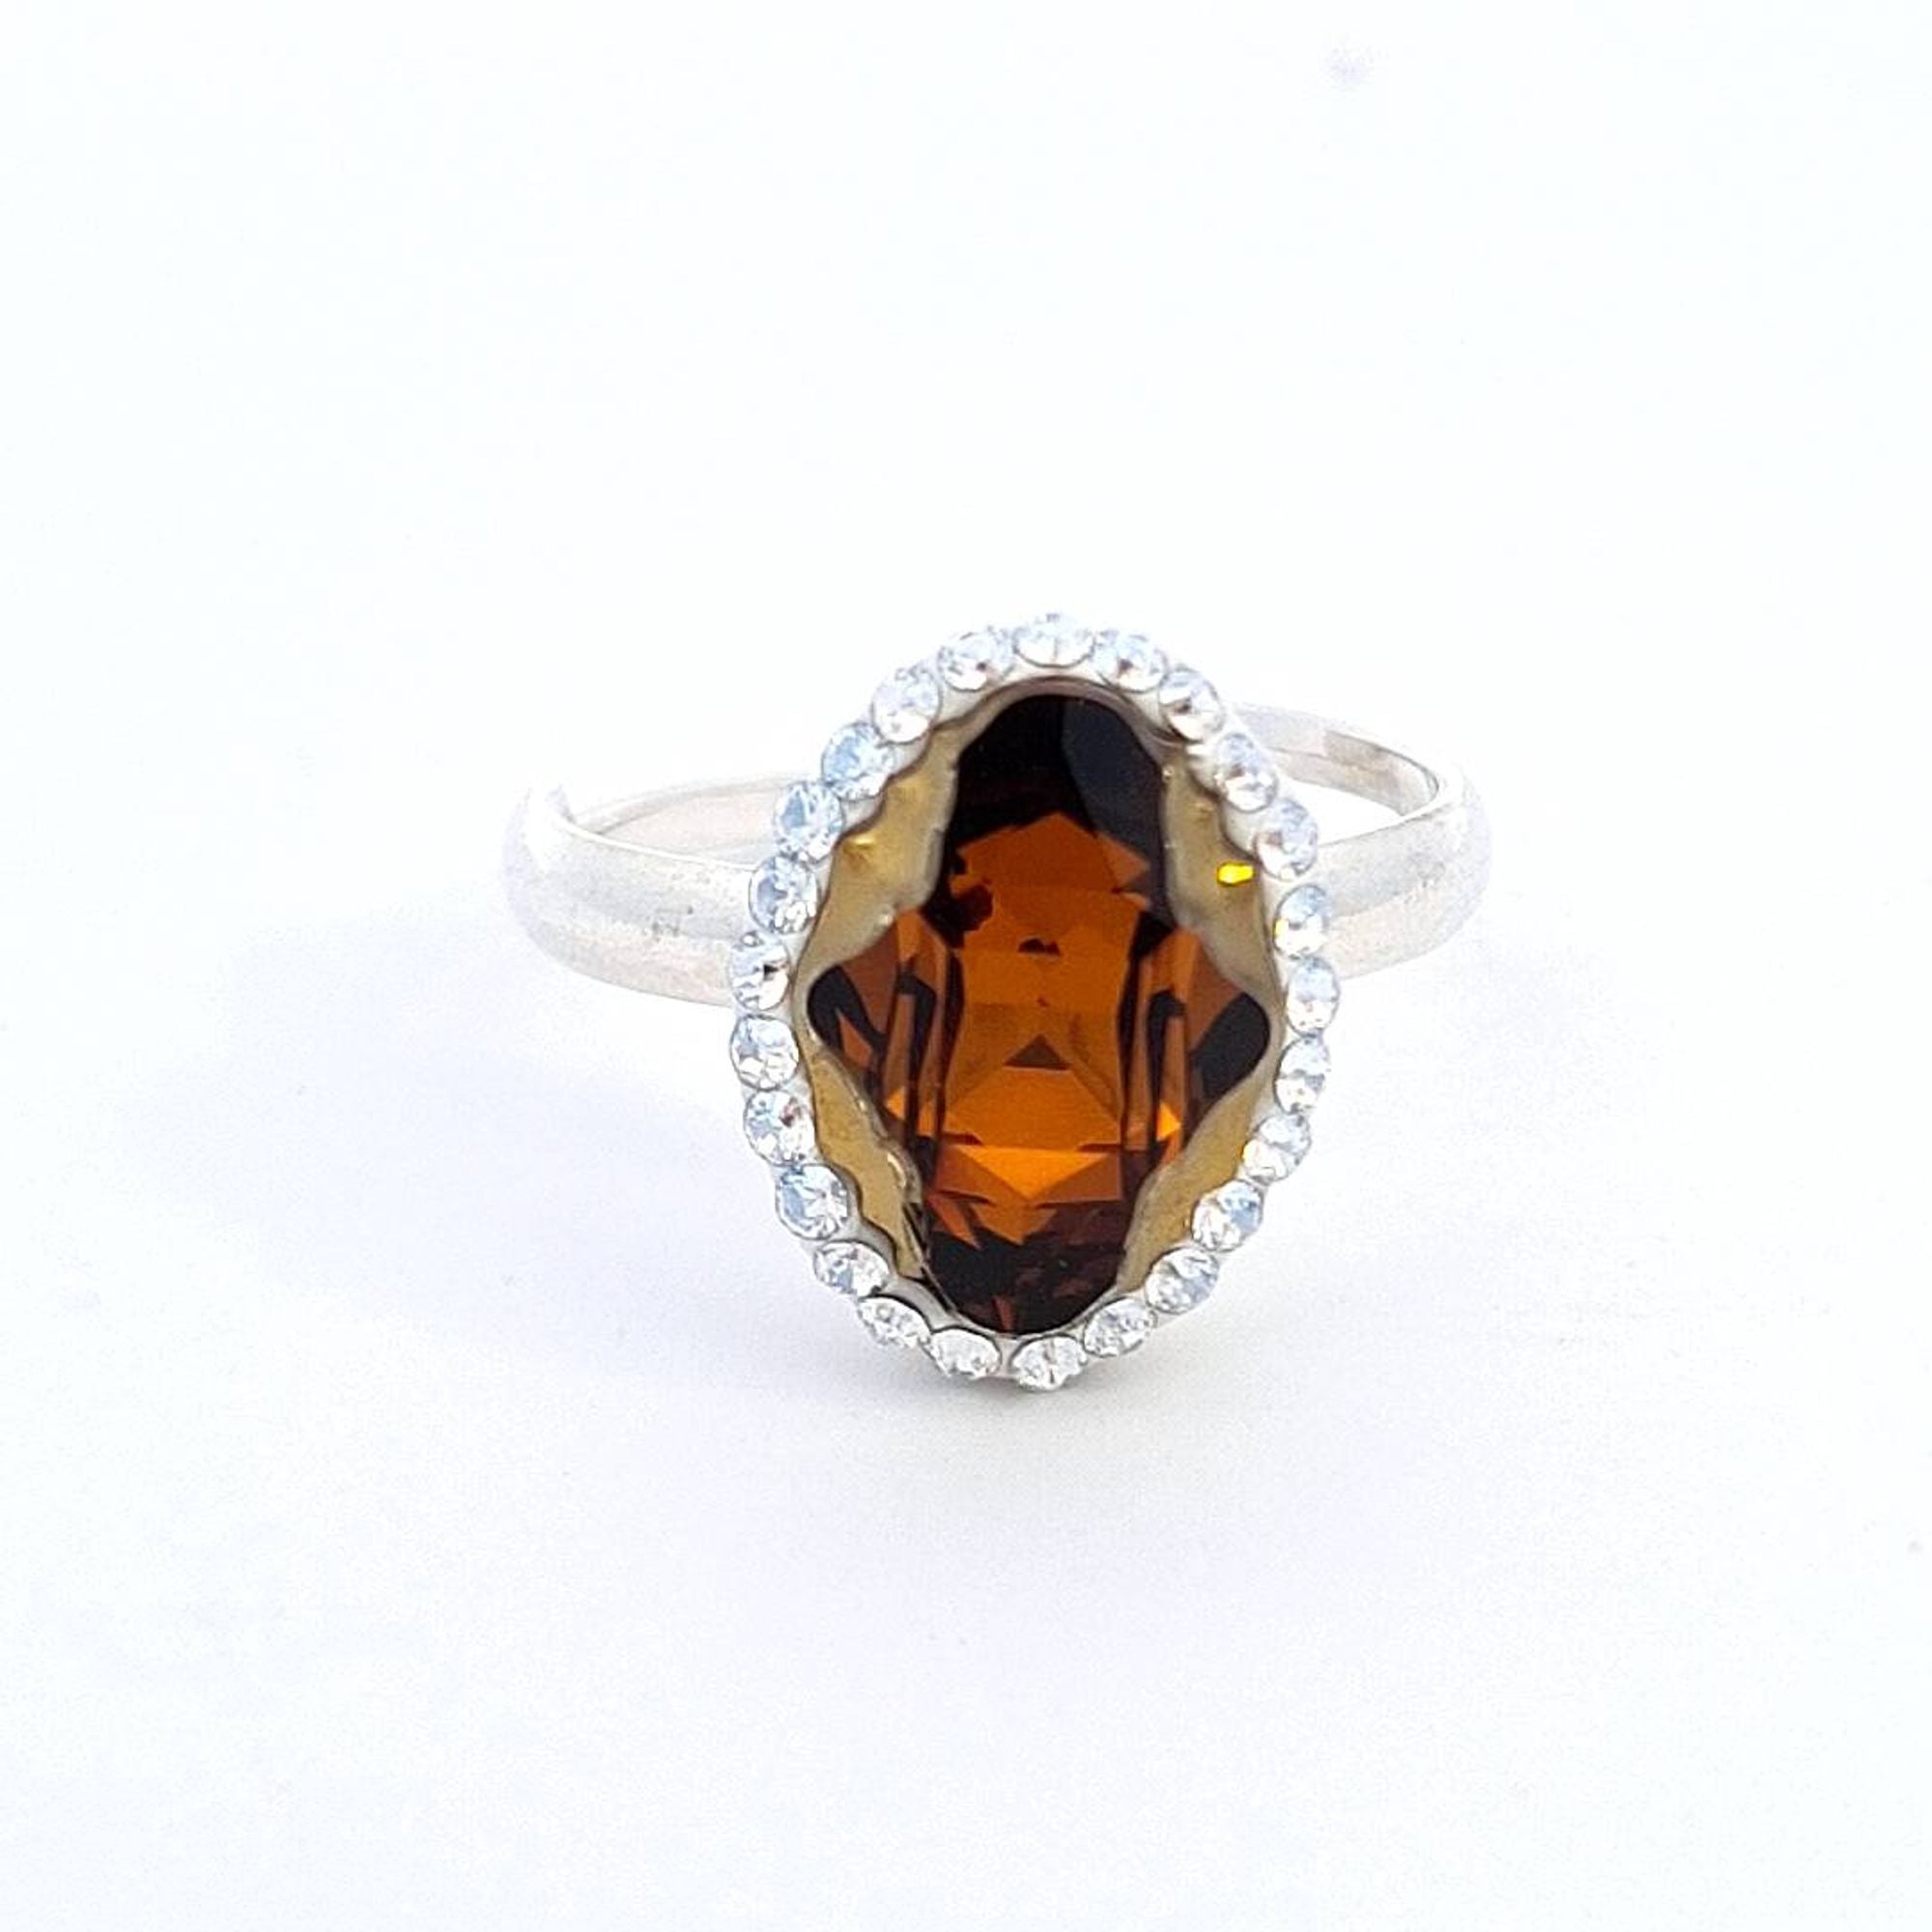 Magpie Gems' Tribe Crystal Amber Aura Halo Ring in Sterling Silver, showcasing an Austrian Tribe crystal.